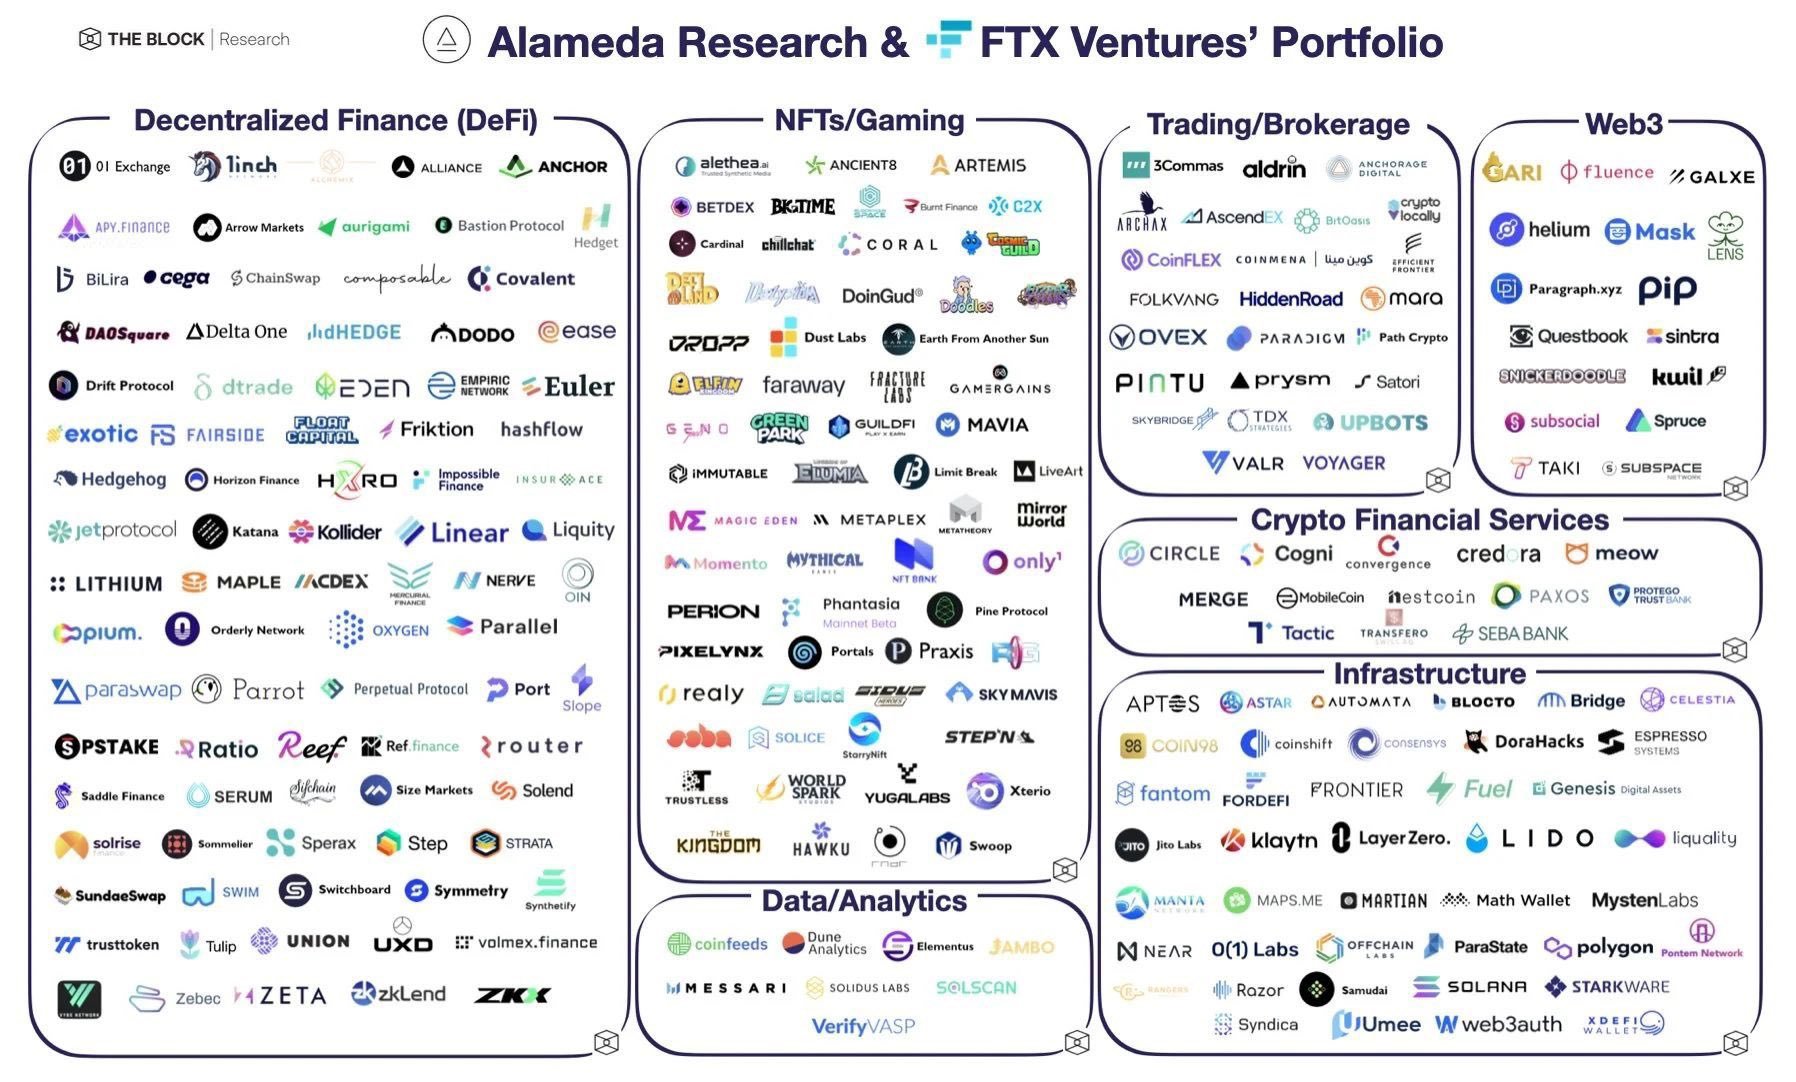 Companies that Alameda and FTX are invested in